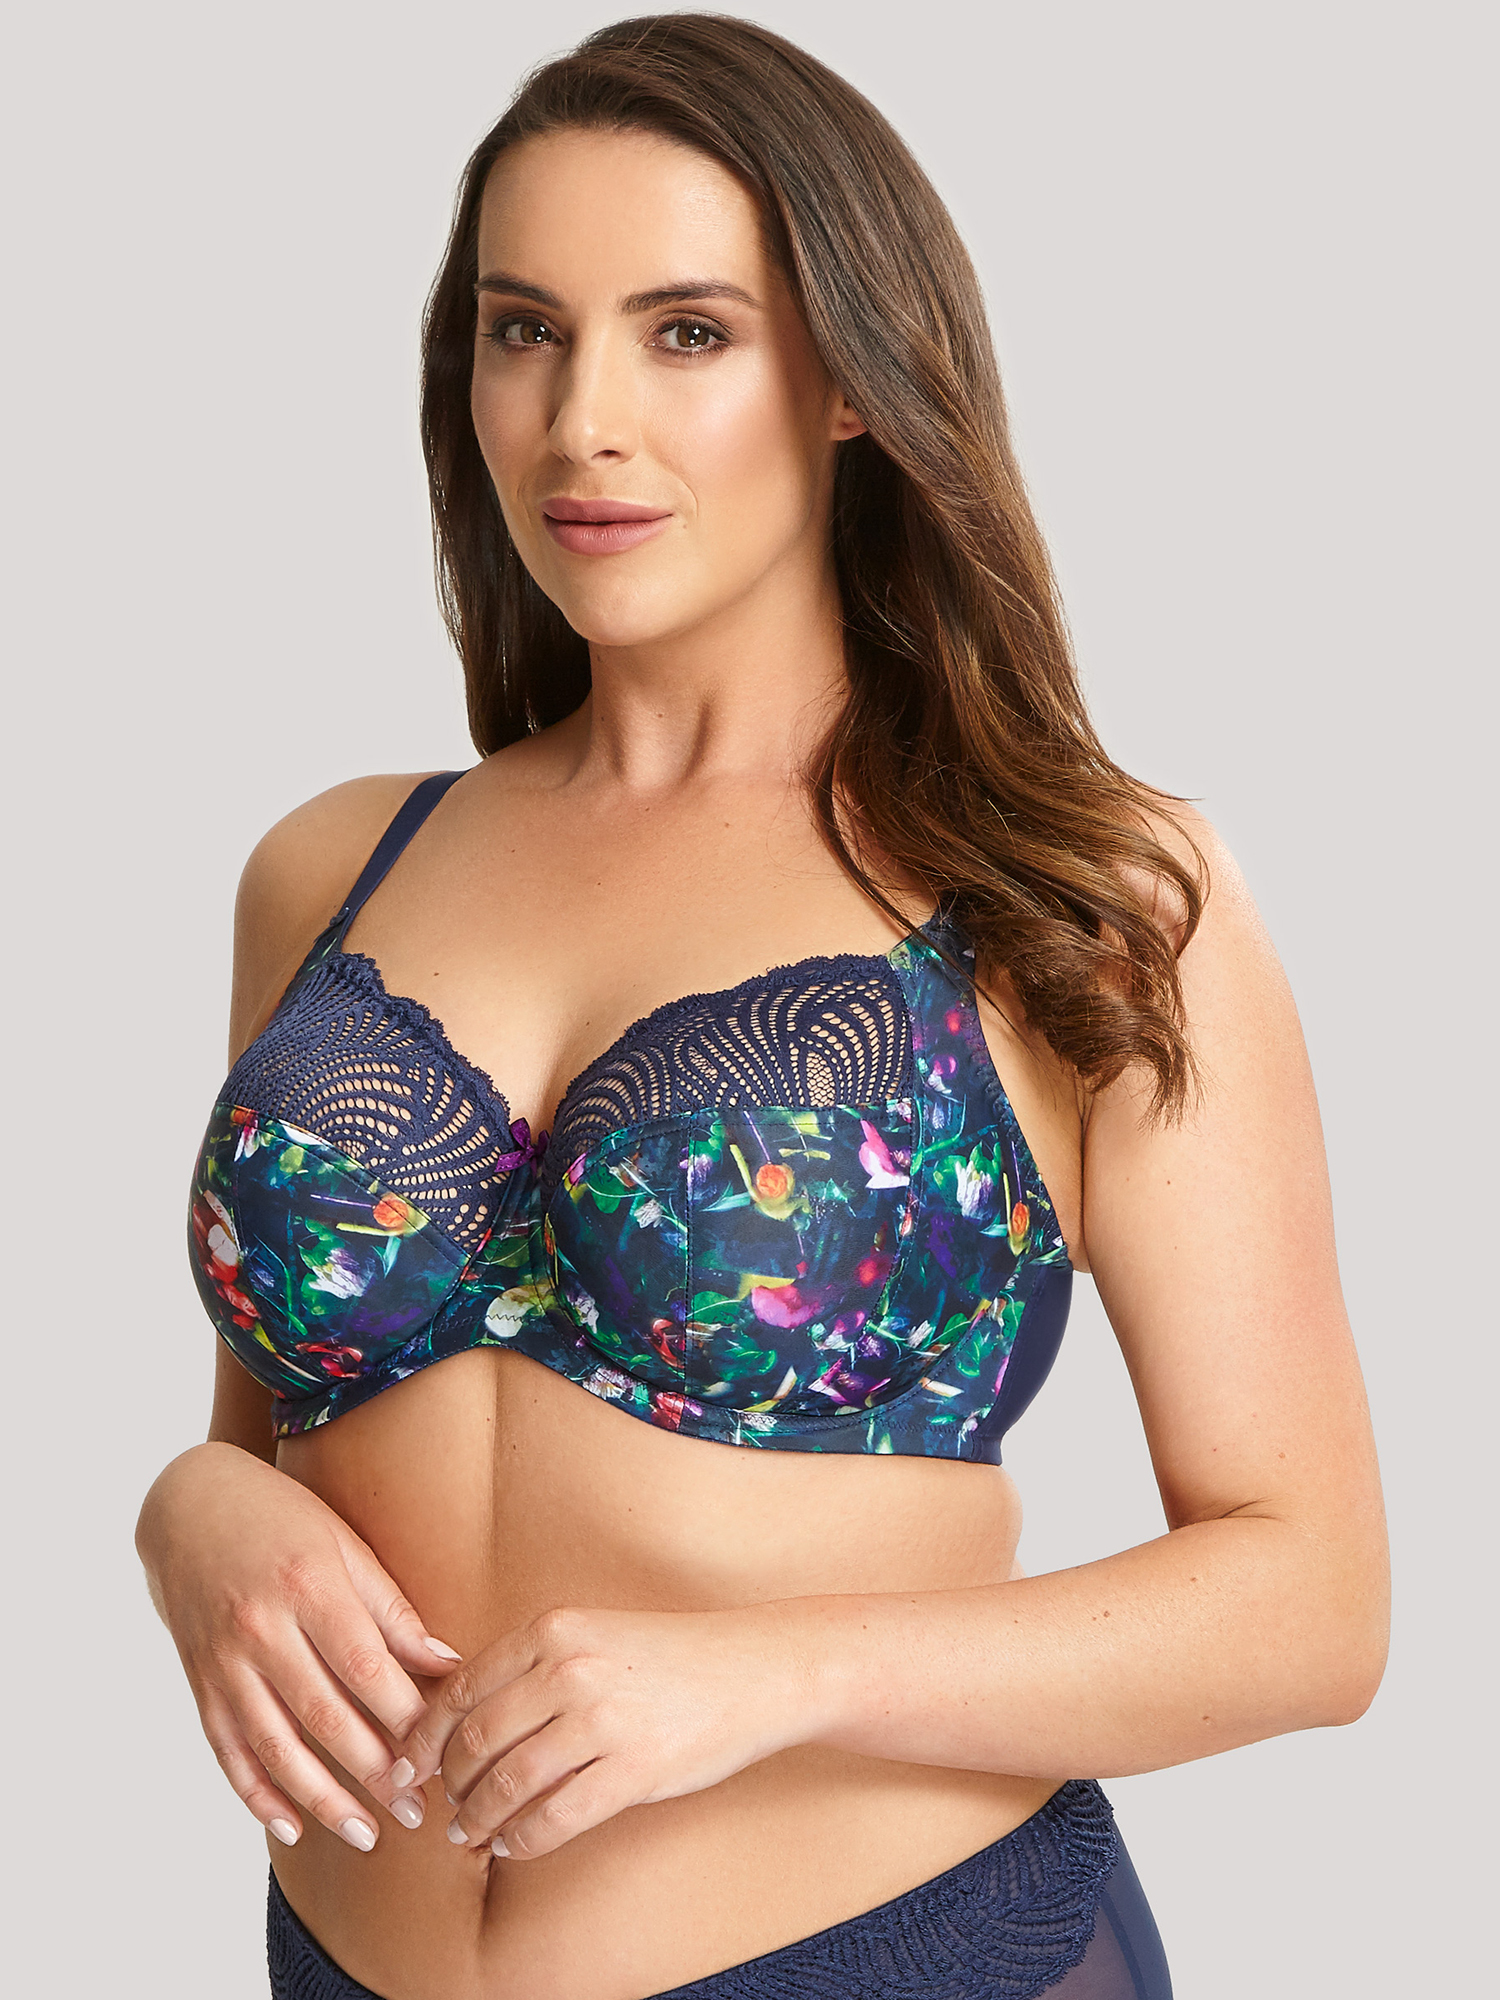 Arianna Full Cup Underwire Bra Damson Floral 34E by Sculptresse by Panache